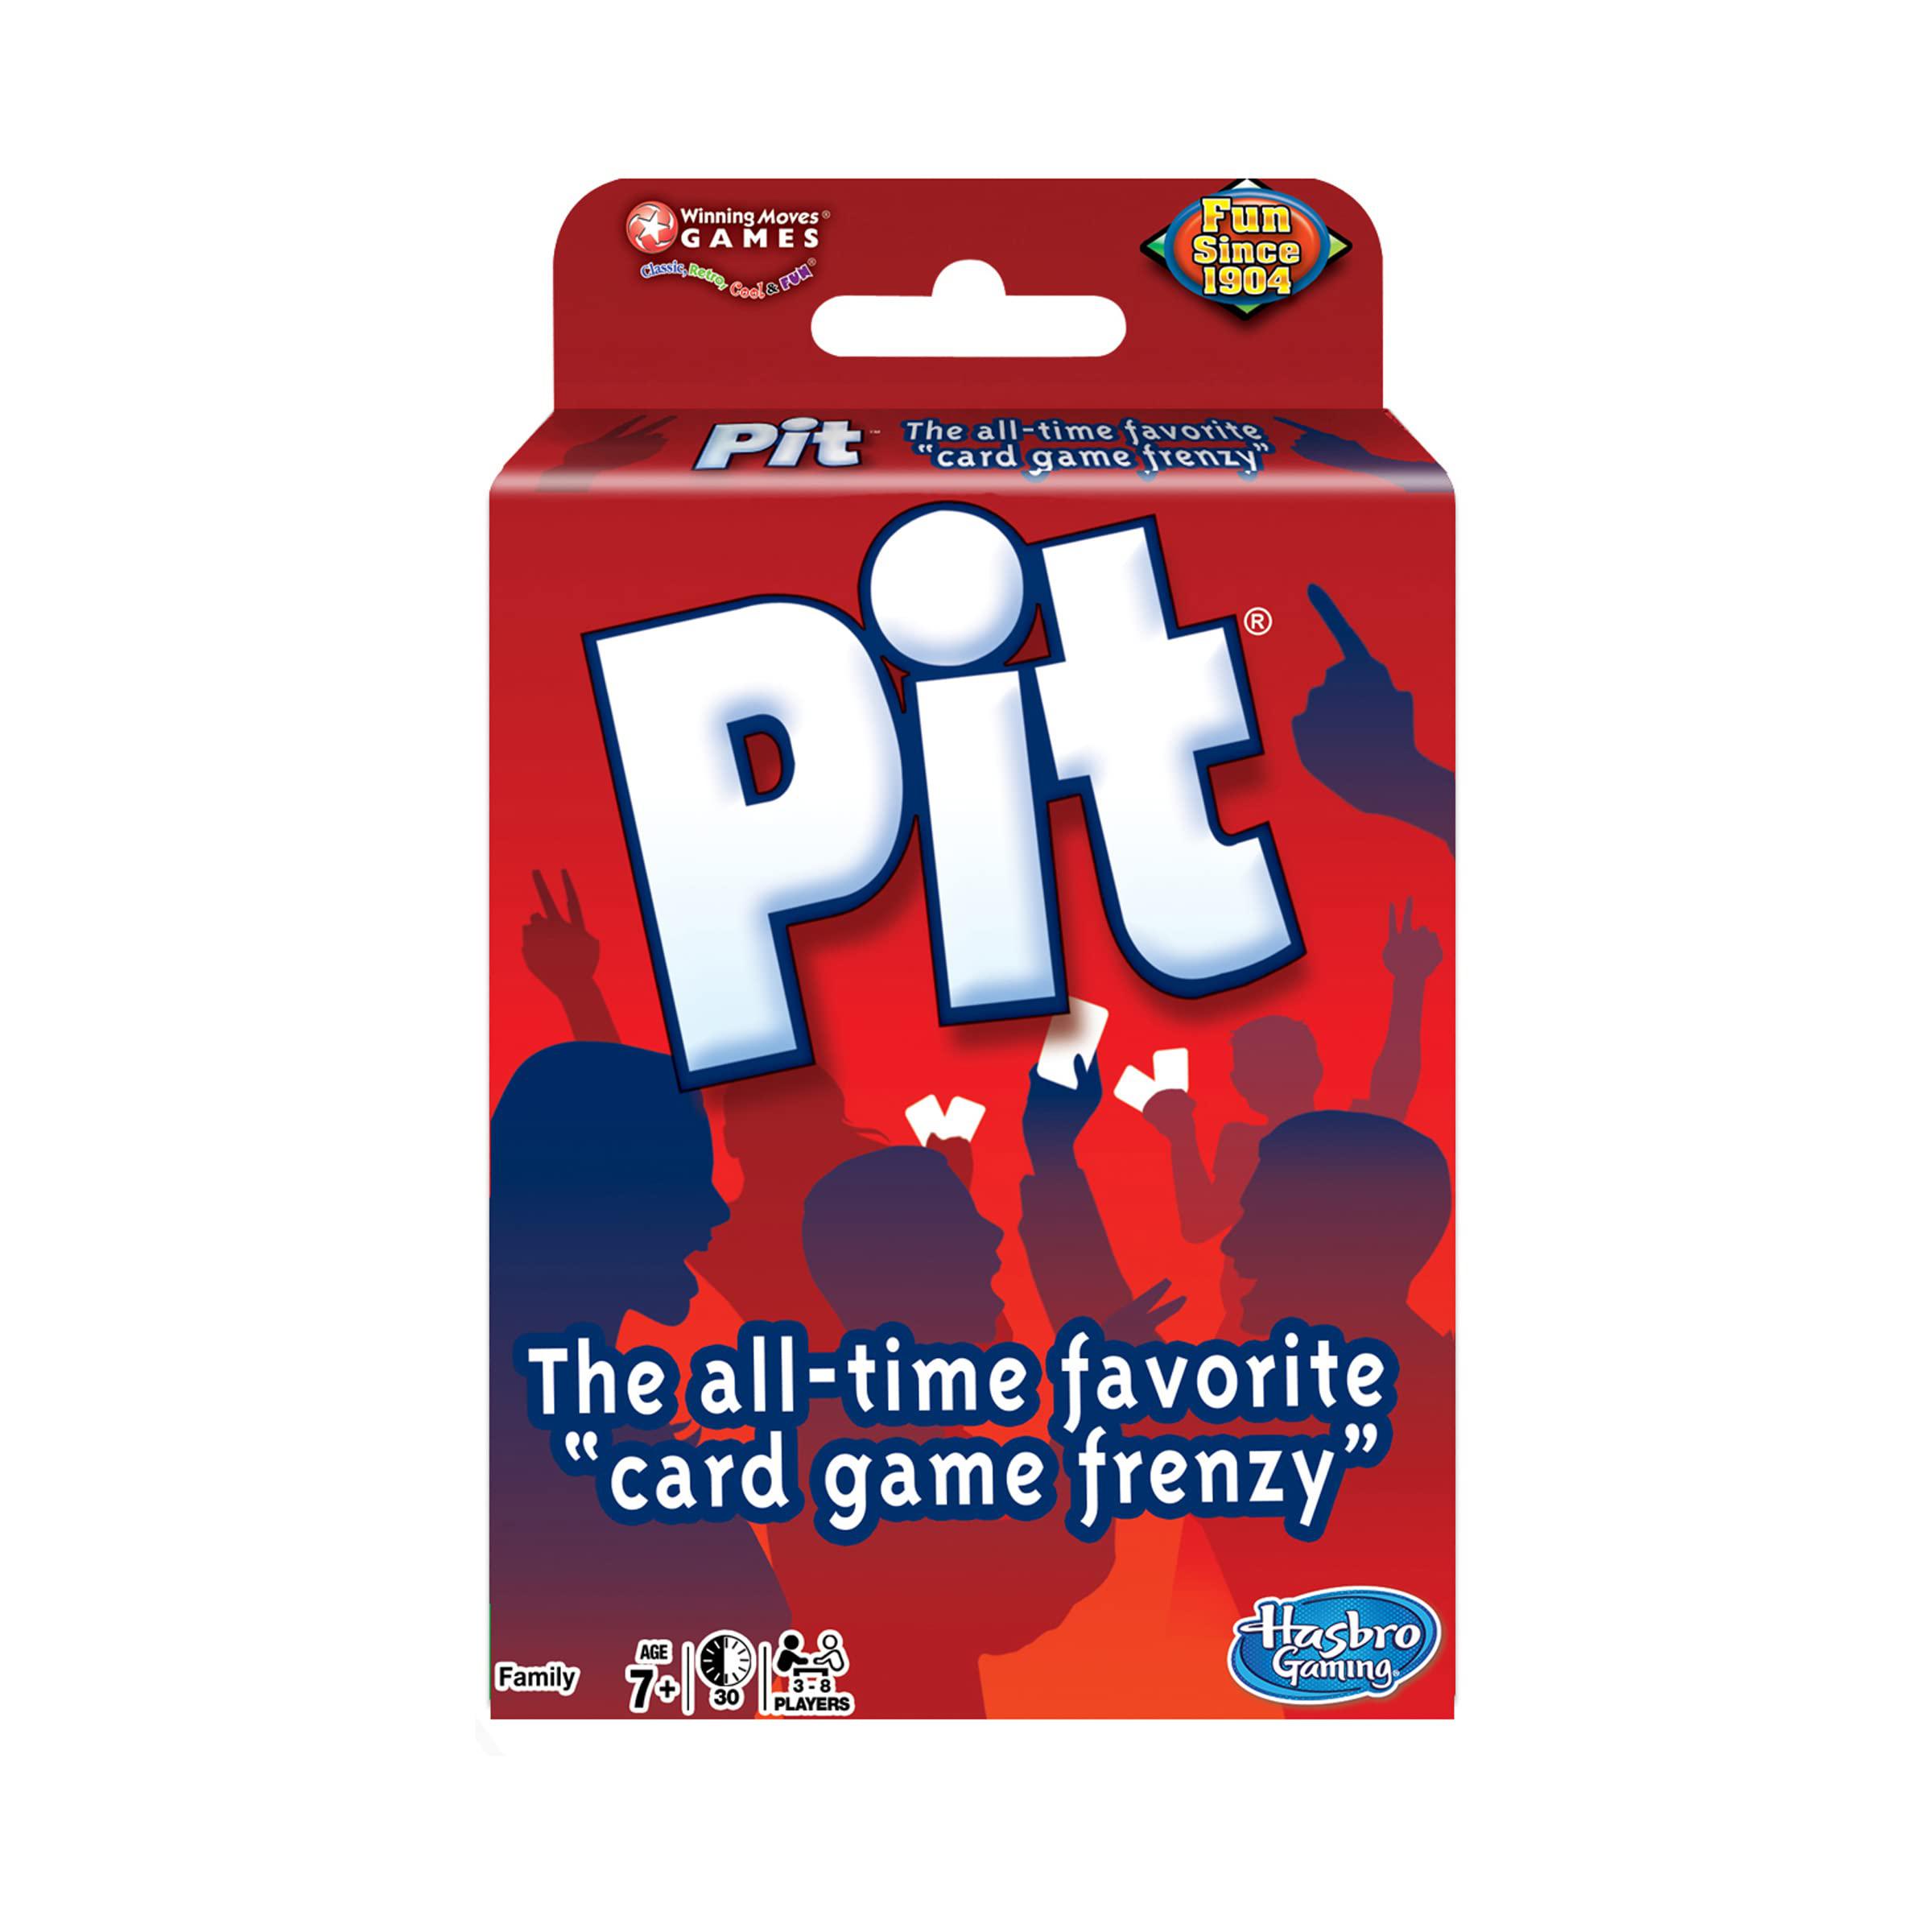 Winning Moves Games new pit card game - corner the market game - winning moves classic trading game